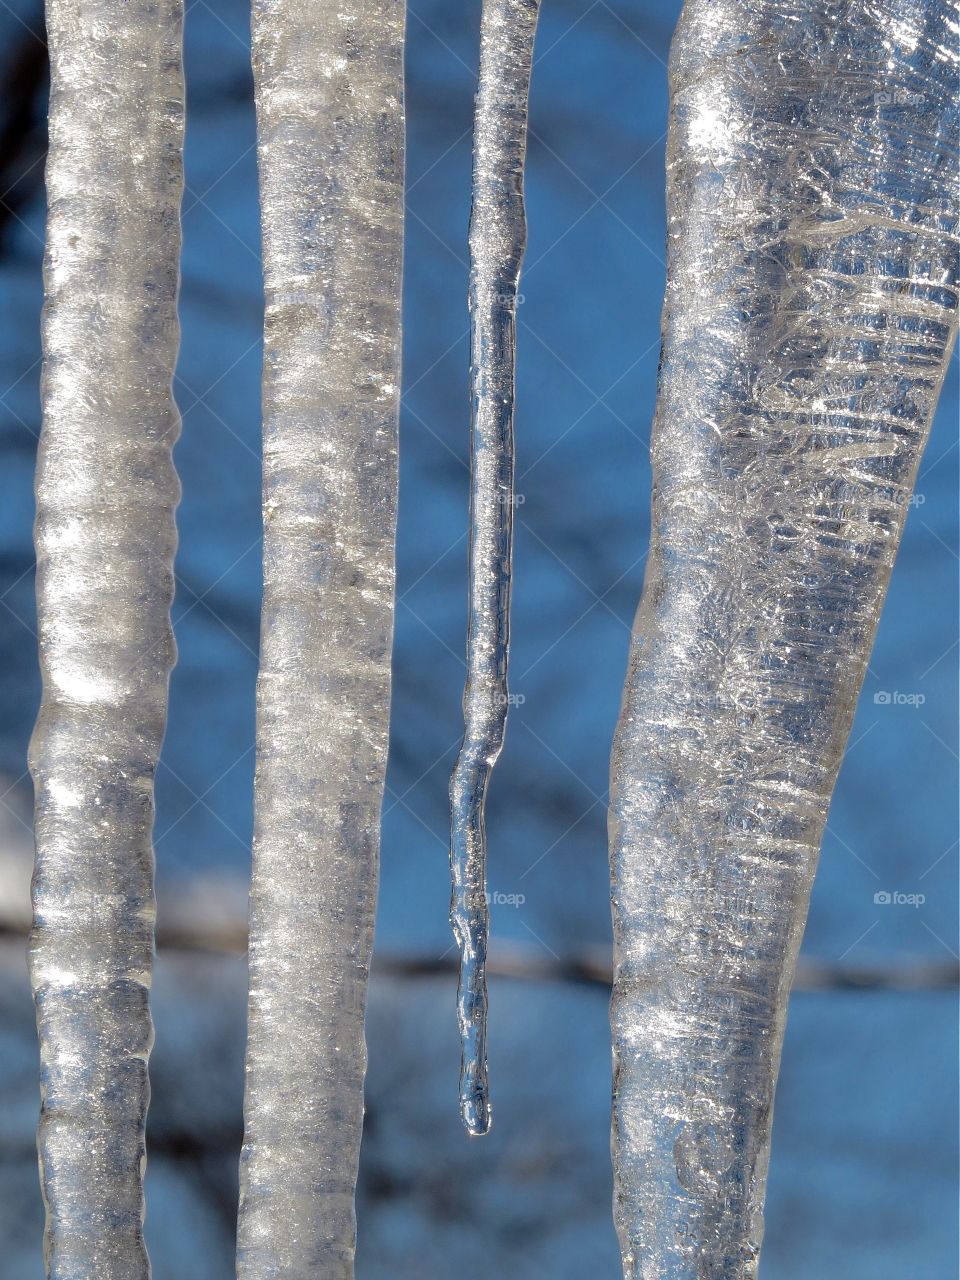 Winter icicles